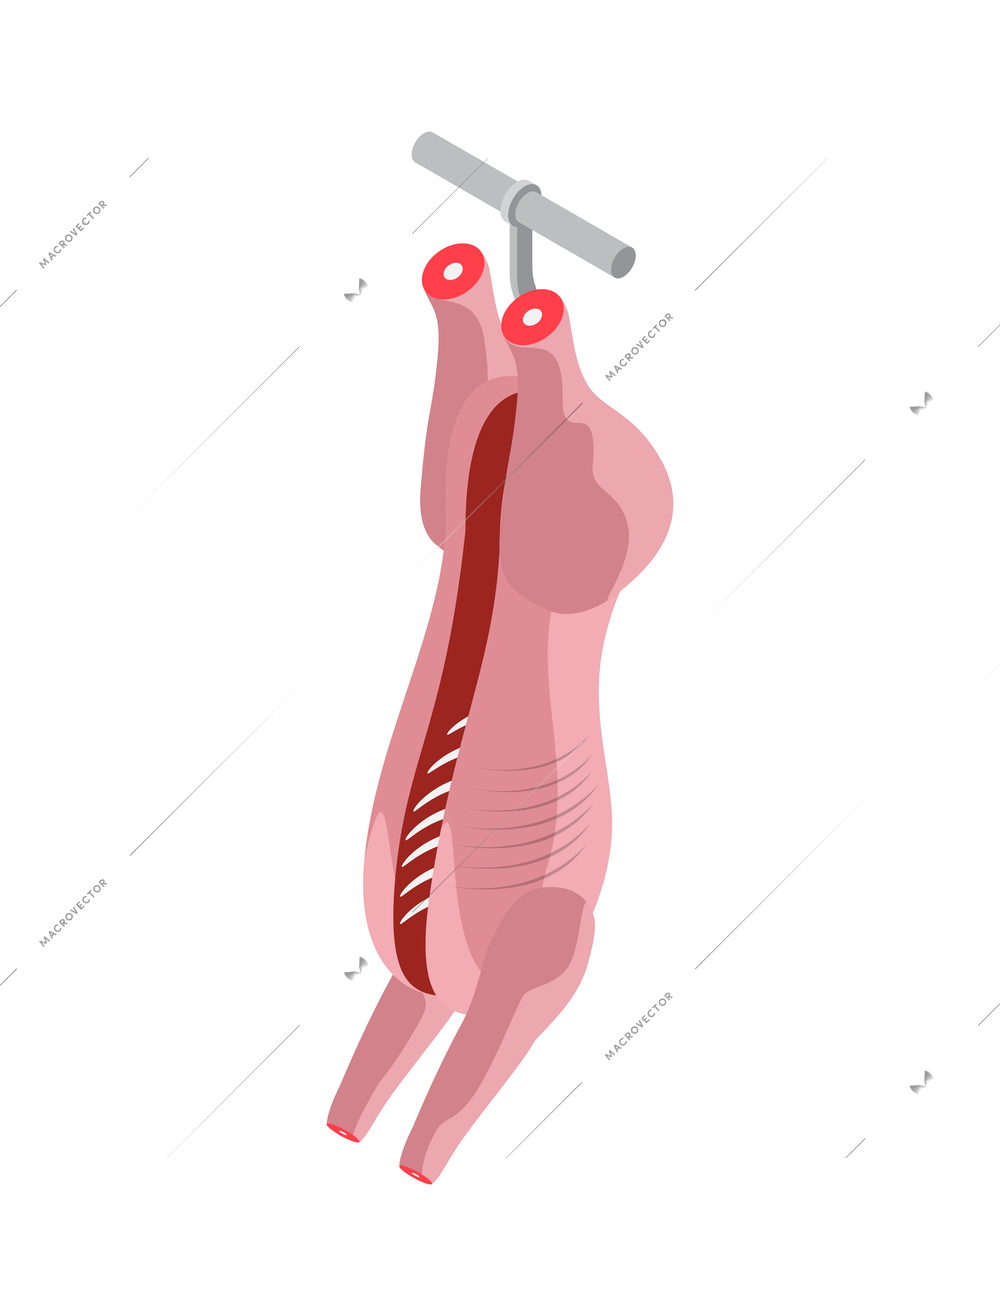 Butchery isometric icon with pork meat carcass icon on white background 3d vector illustration